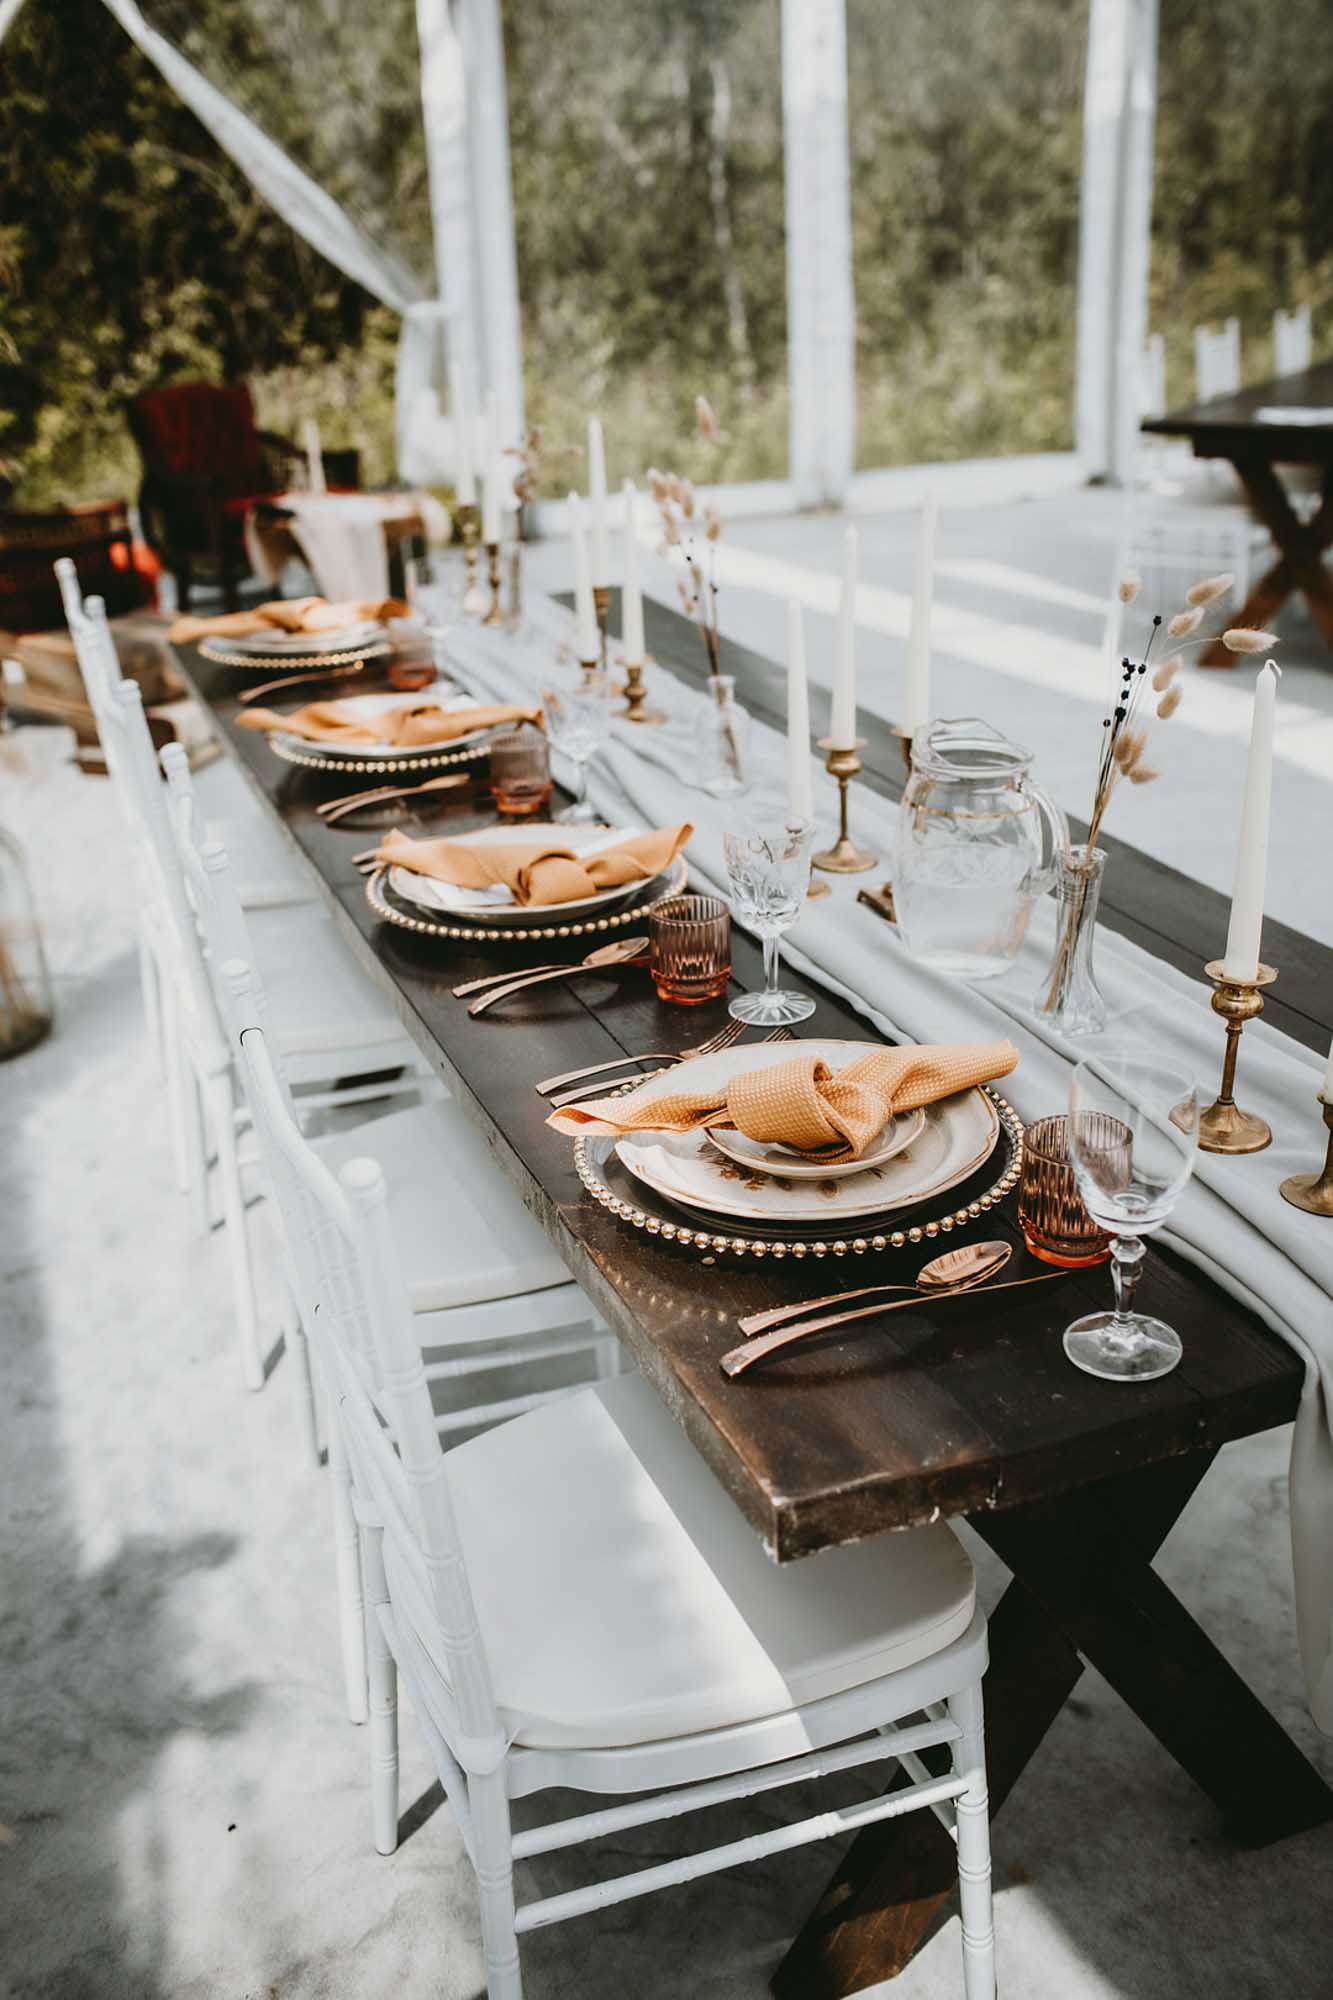 70s themed glamping elopement inspiration in Manitoba, Canada | Christina W. Kroeker Creative | Featured on Equally Wed, the leading LGBTQ+ wedding magazine